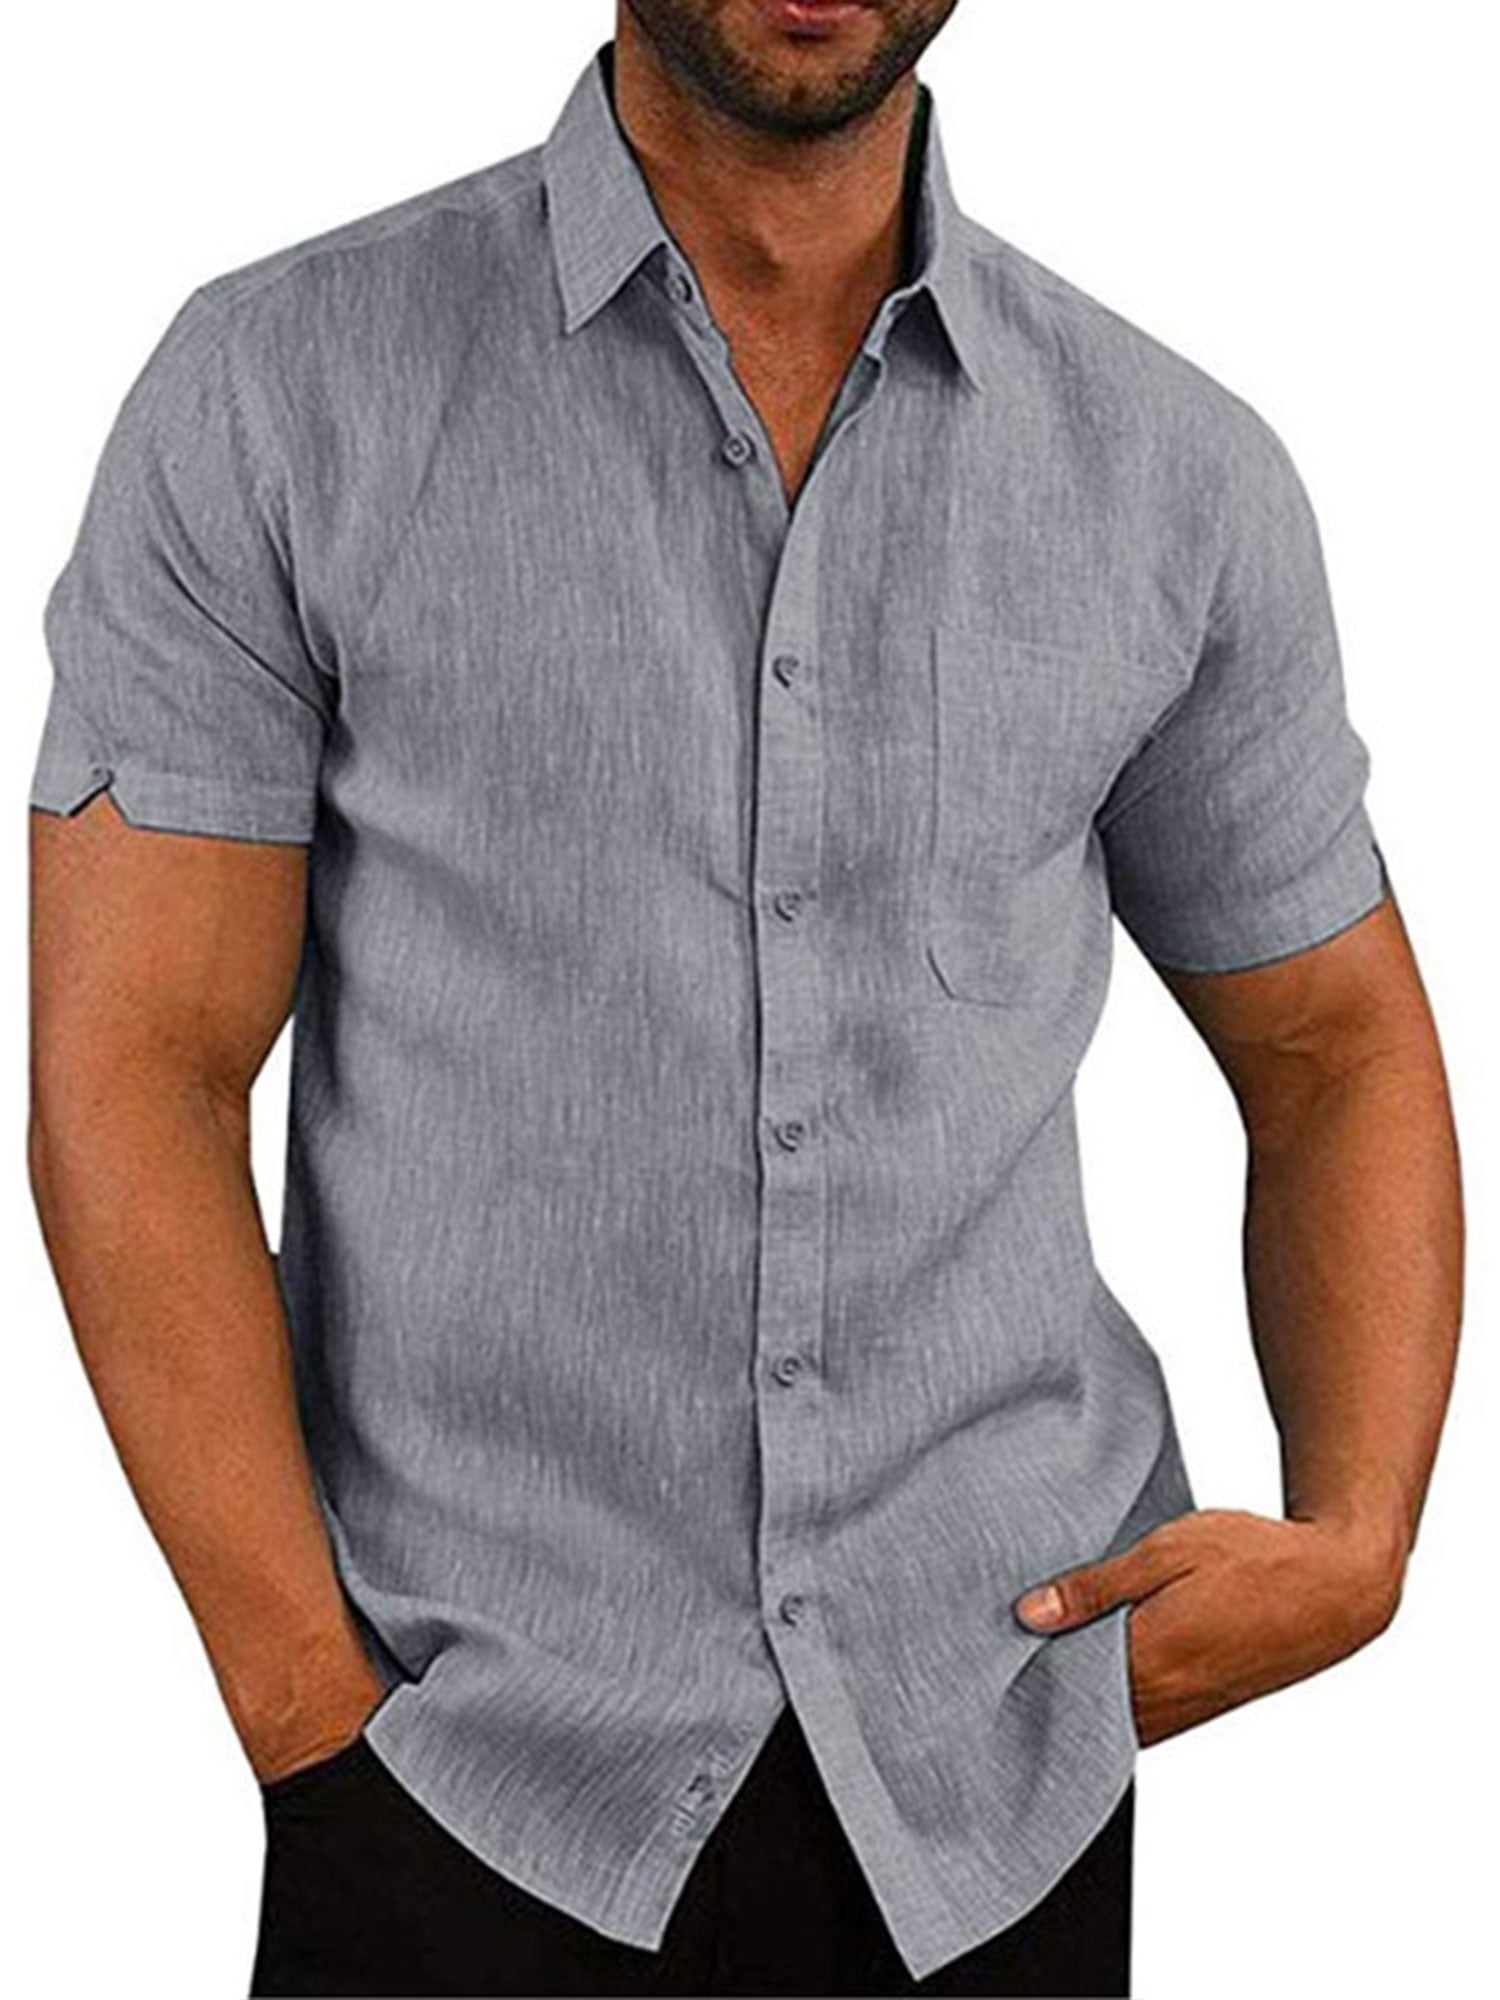 Domple Mens Solid Color Dress Shirts Summer Short Sleeve Button Up Shirts